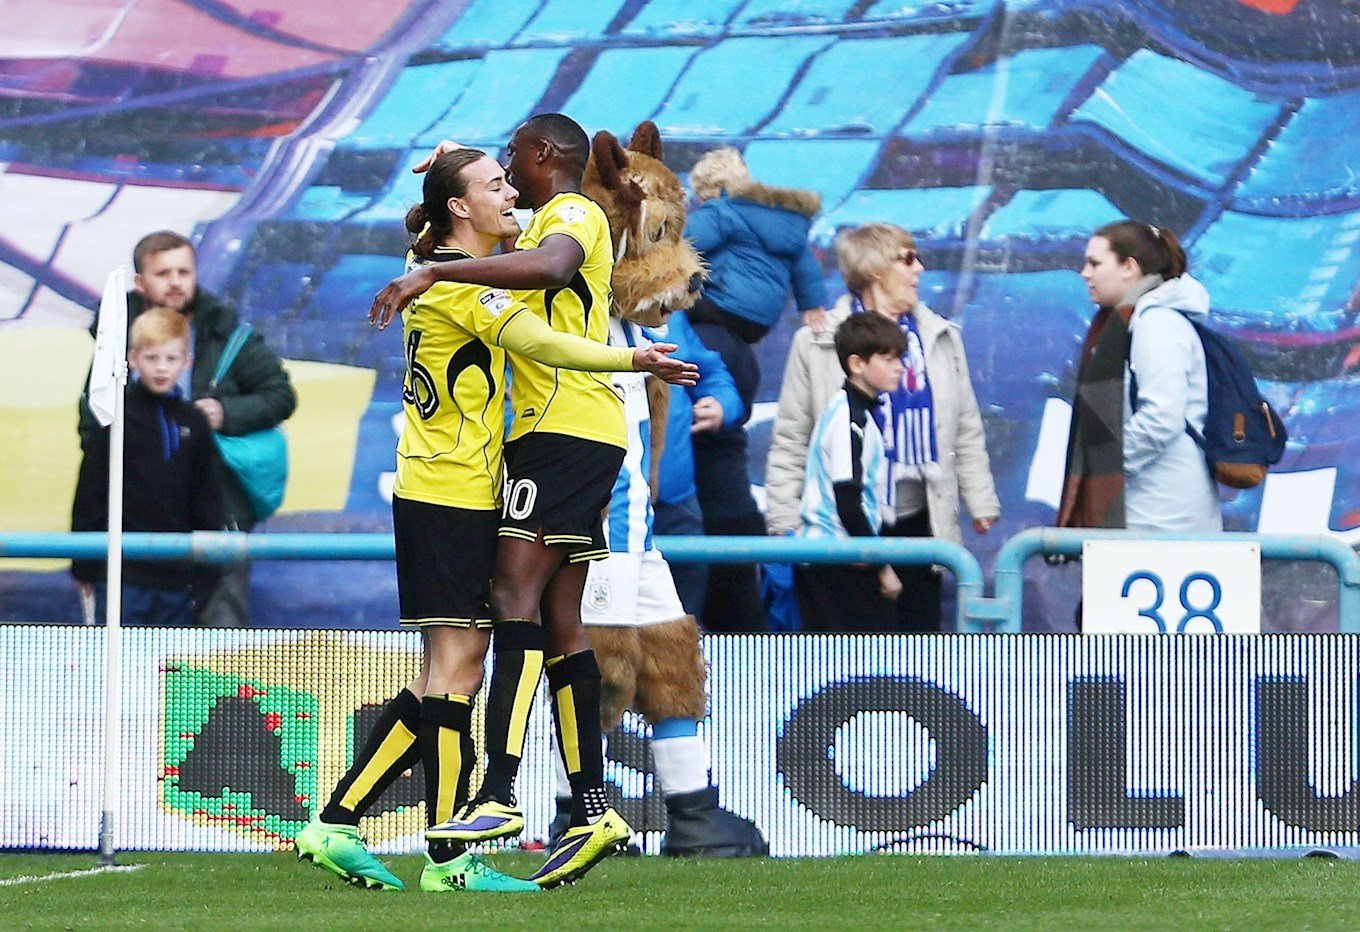 Jackson Irvine of Burton Albion celebrates scoring the opening goal with Lucas Akins during the Sky Bet Championship match between Huddersfield Town and Burton Albion played at the John Smith